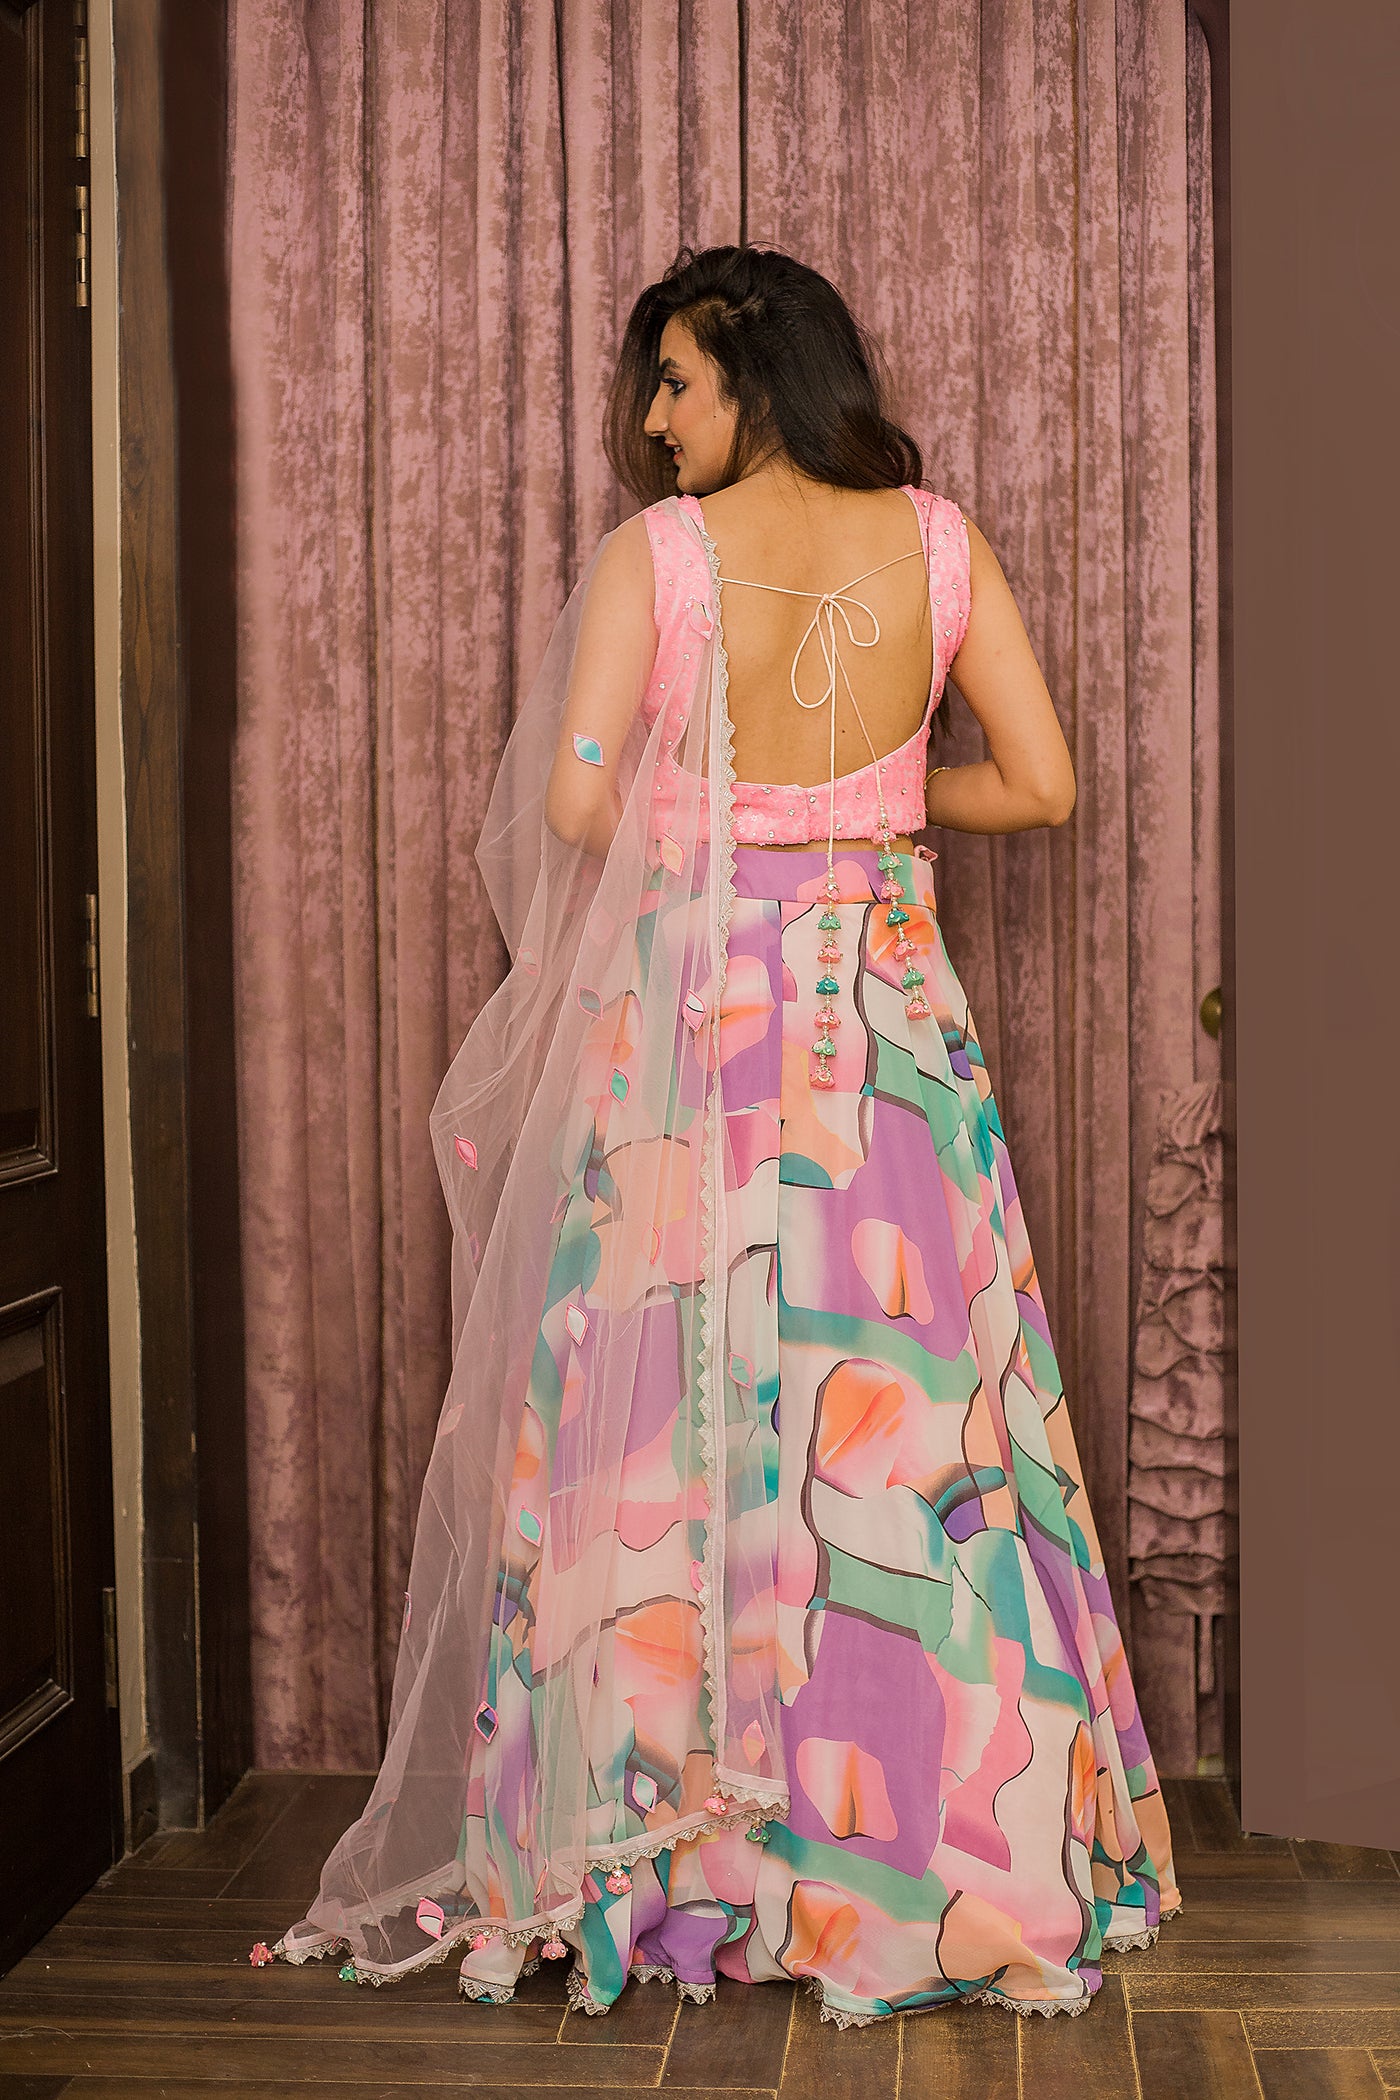 Pink Contemporary Print Lehenga Indian Clothing in Denver, CO, Aurora, CO, Boulder, CO, Fort Collins, CO, Colorado Springs, CO, Parker, CO, Highlands Ranch, CO, Cherry Creek, CO, Centennial, CO, and Longmont, CO. NATIONWIDE SHIPPING USA- India Fashion X